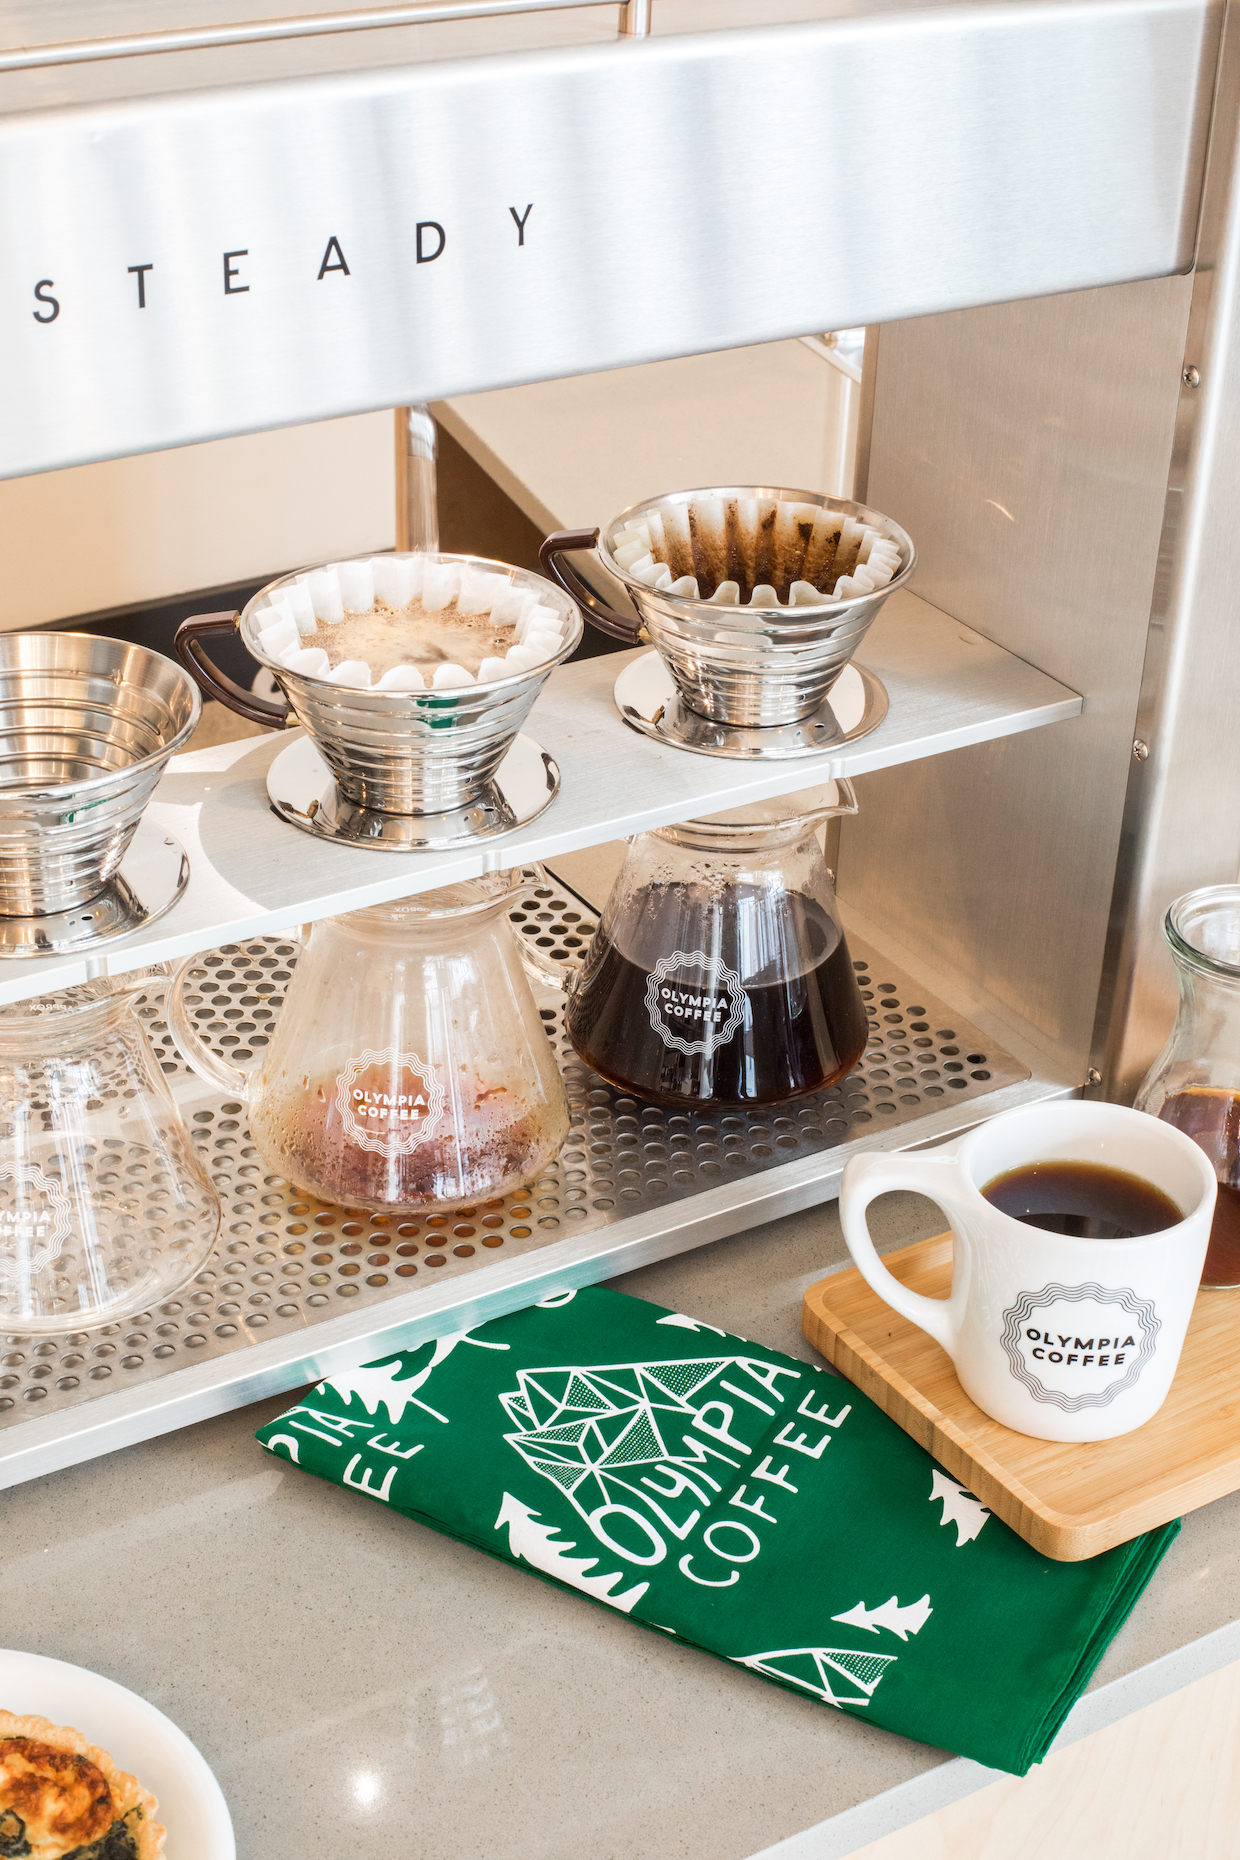 Meet the Poursteady: Coffee's Game-Changing Pour-Over Machine - Eater